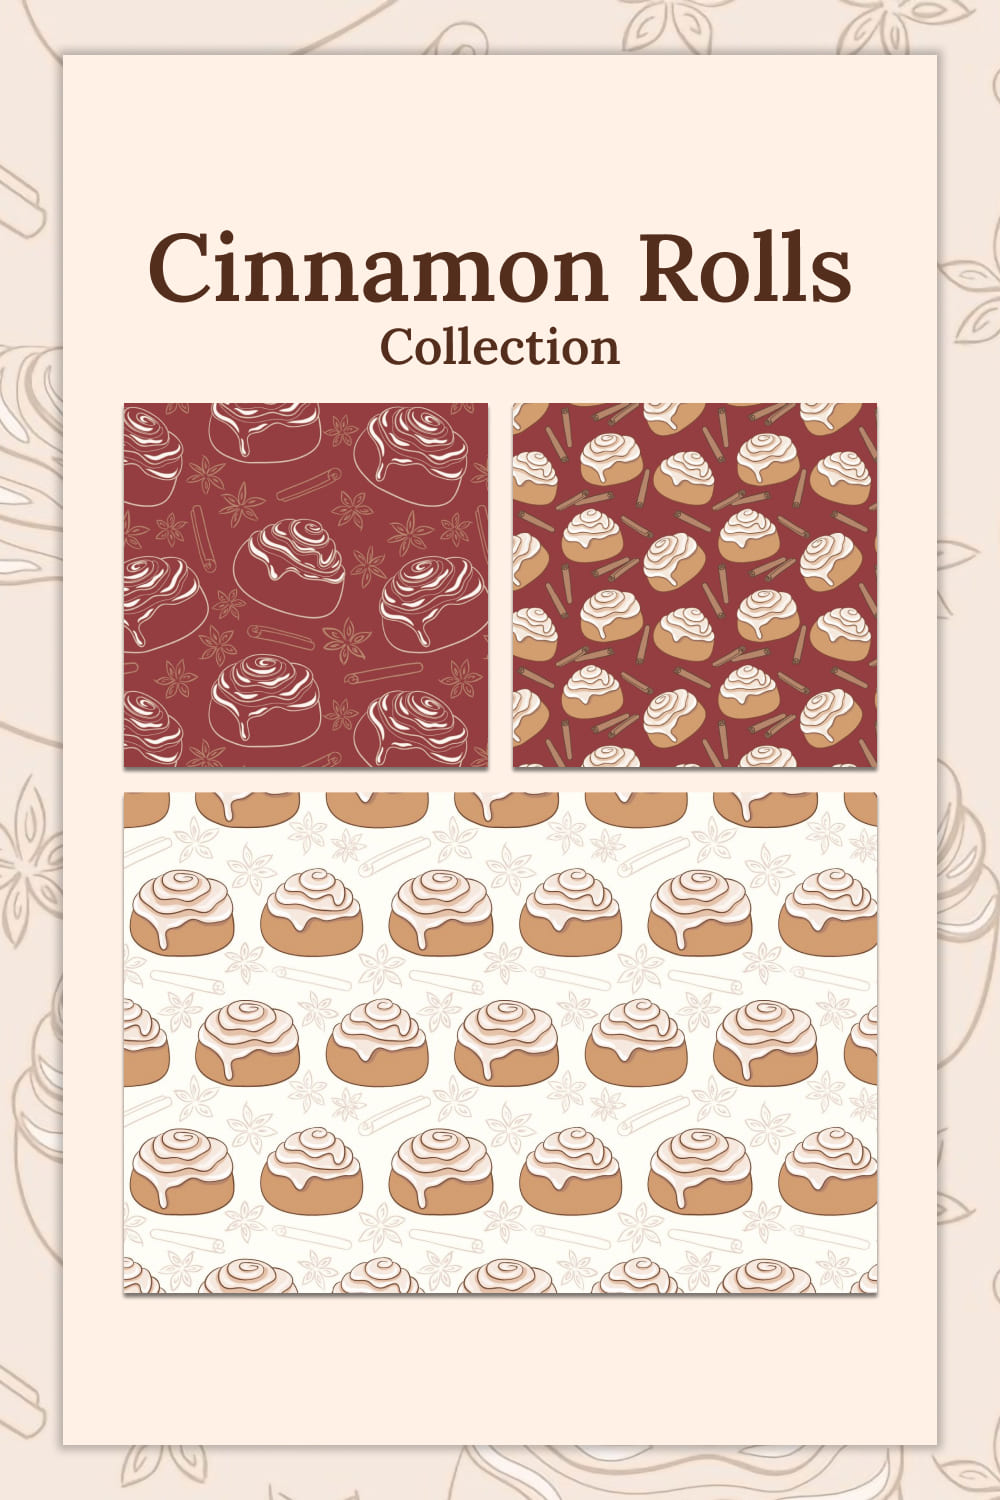 Cinnamon rolls collection - pinterest image preview.